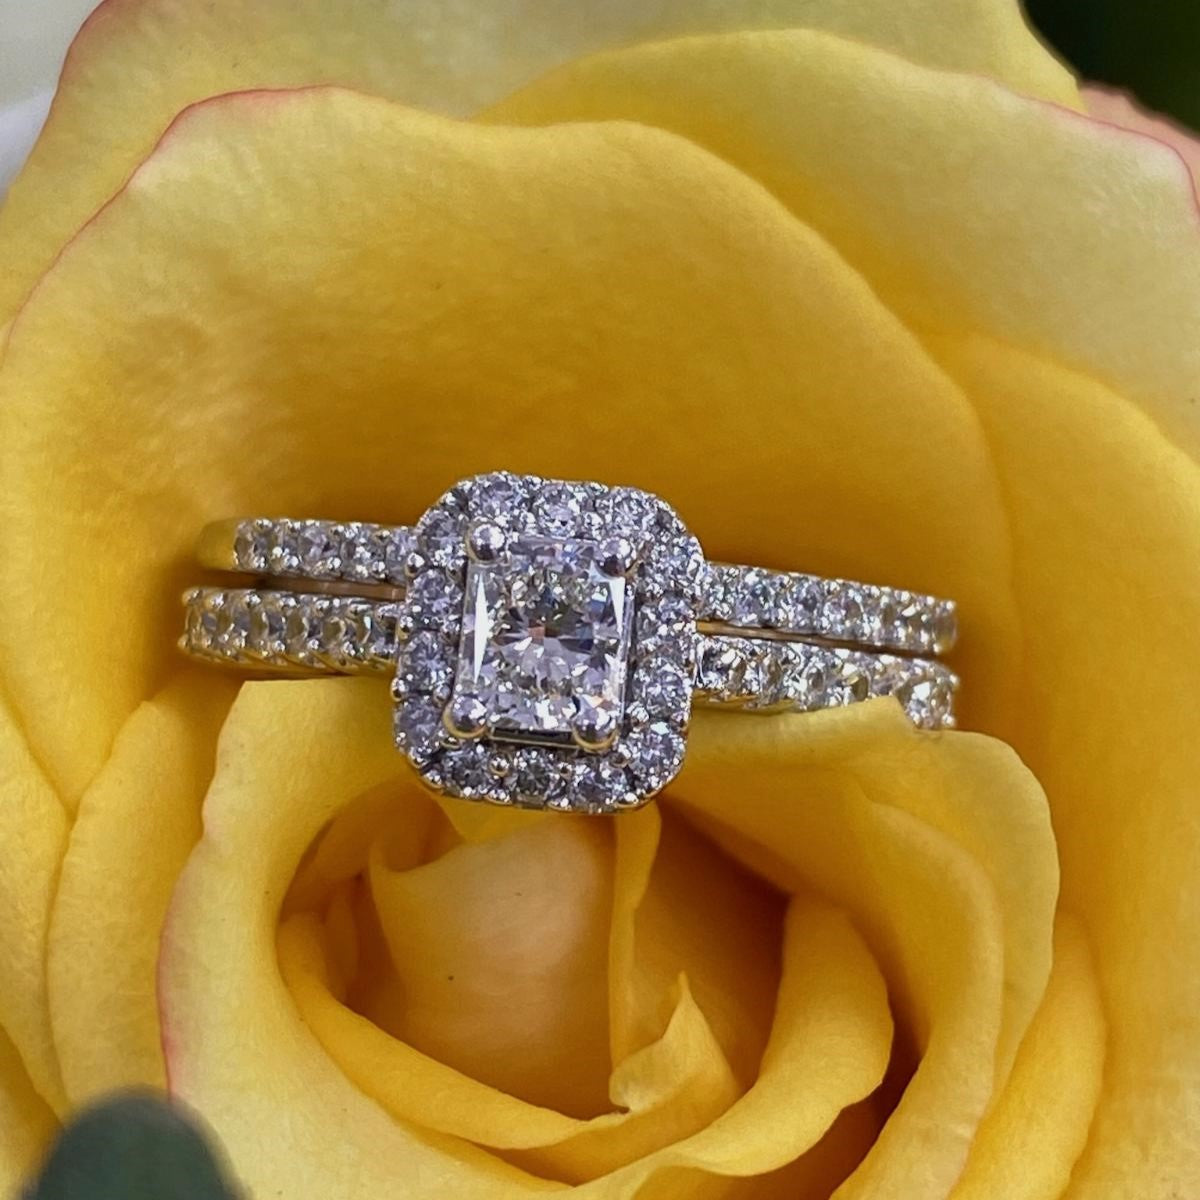 14K White Gold Diamond Engagement Ring With A Radiant Cut Center Diamond